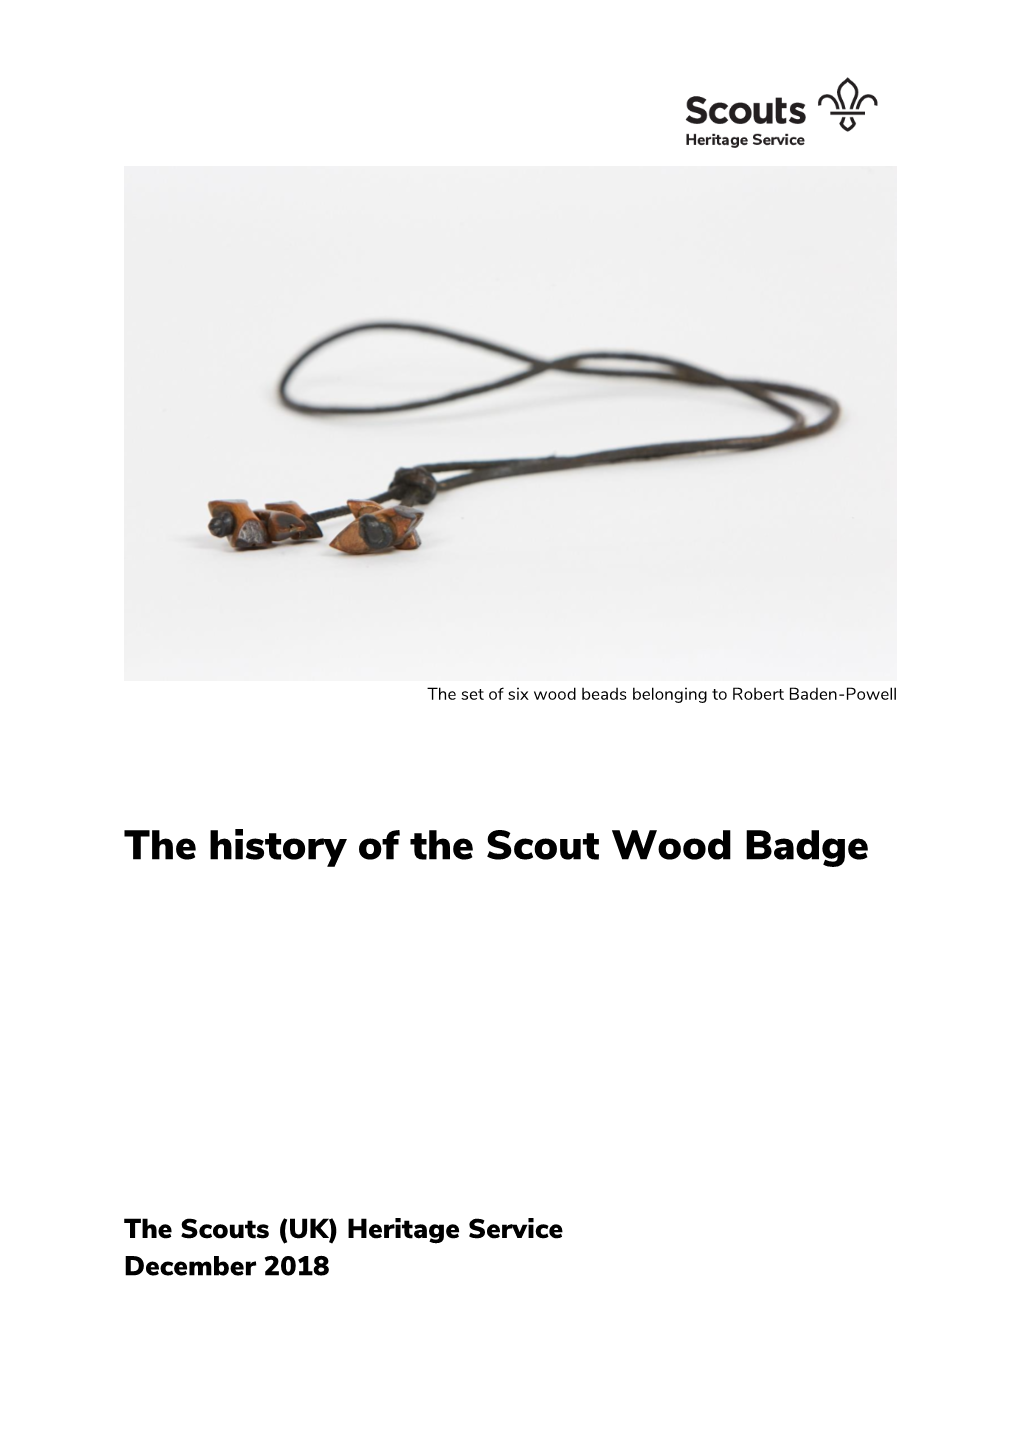 The History of the Scout Wood Badge